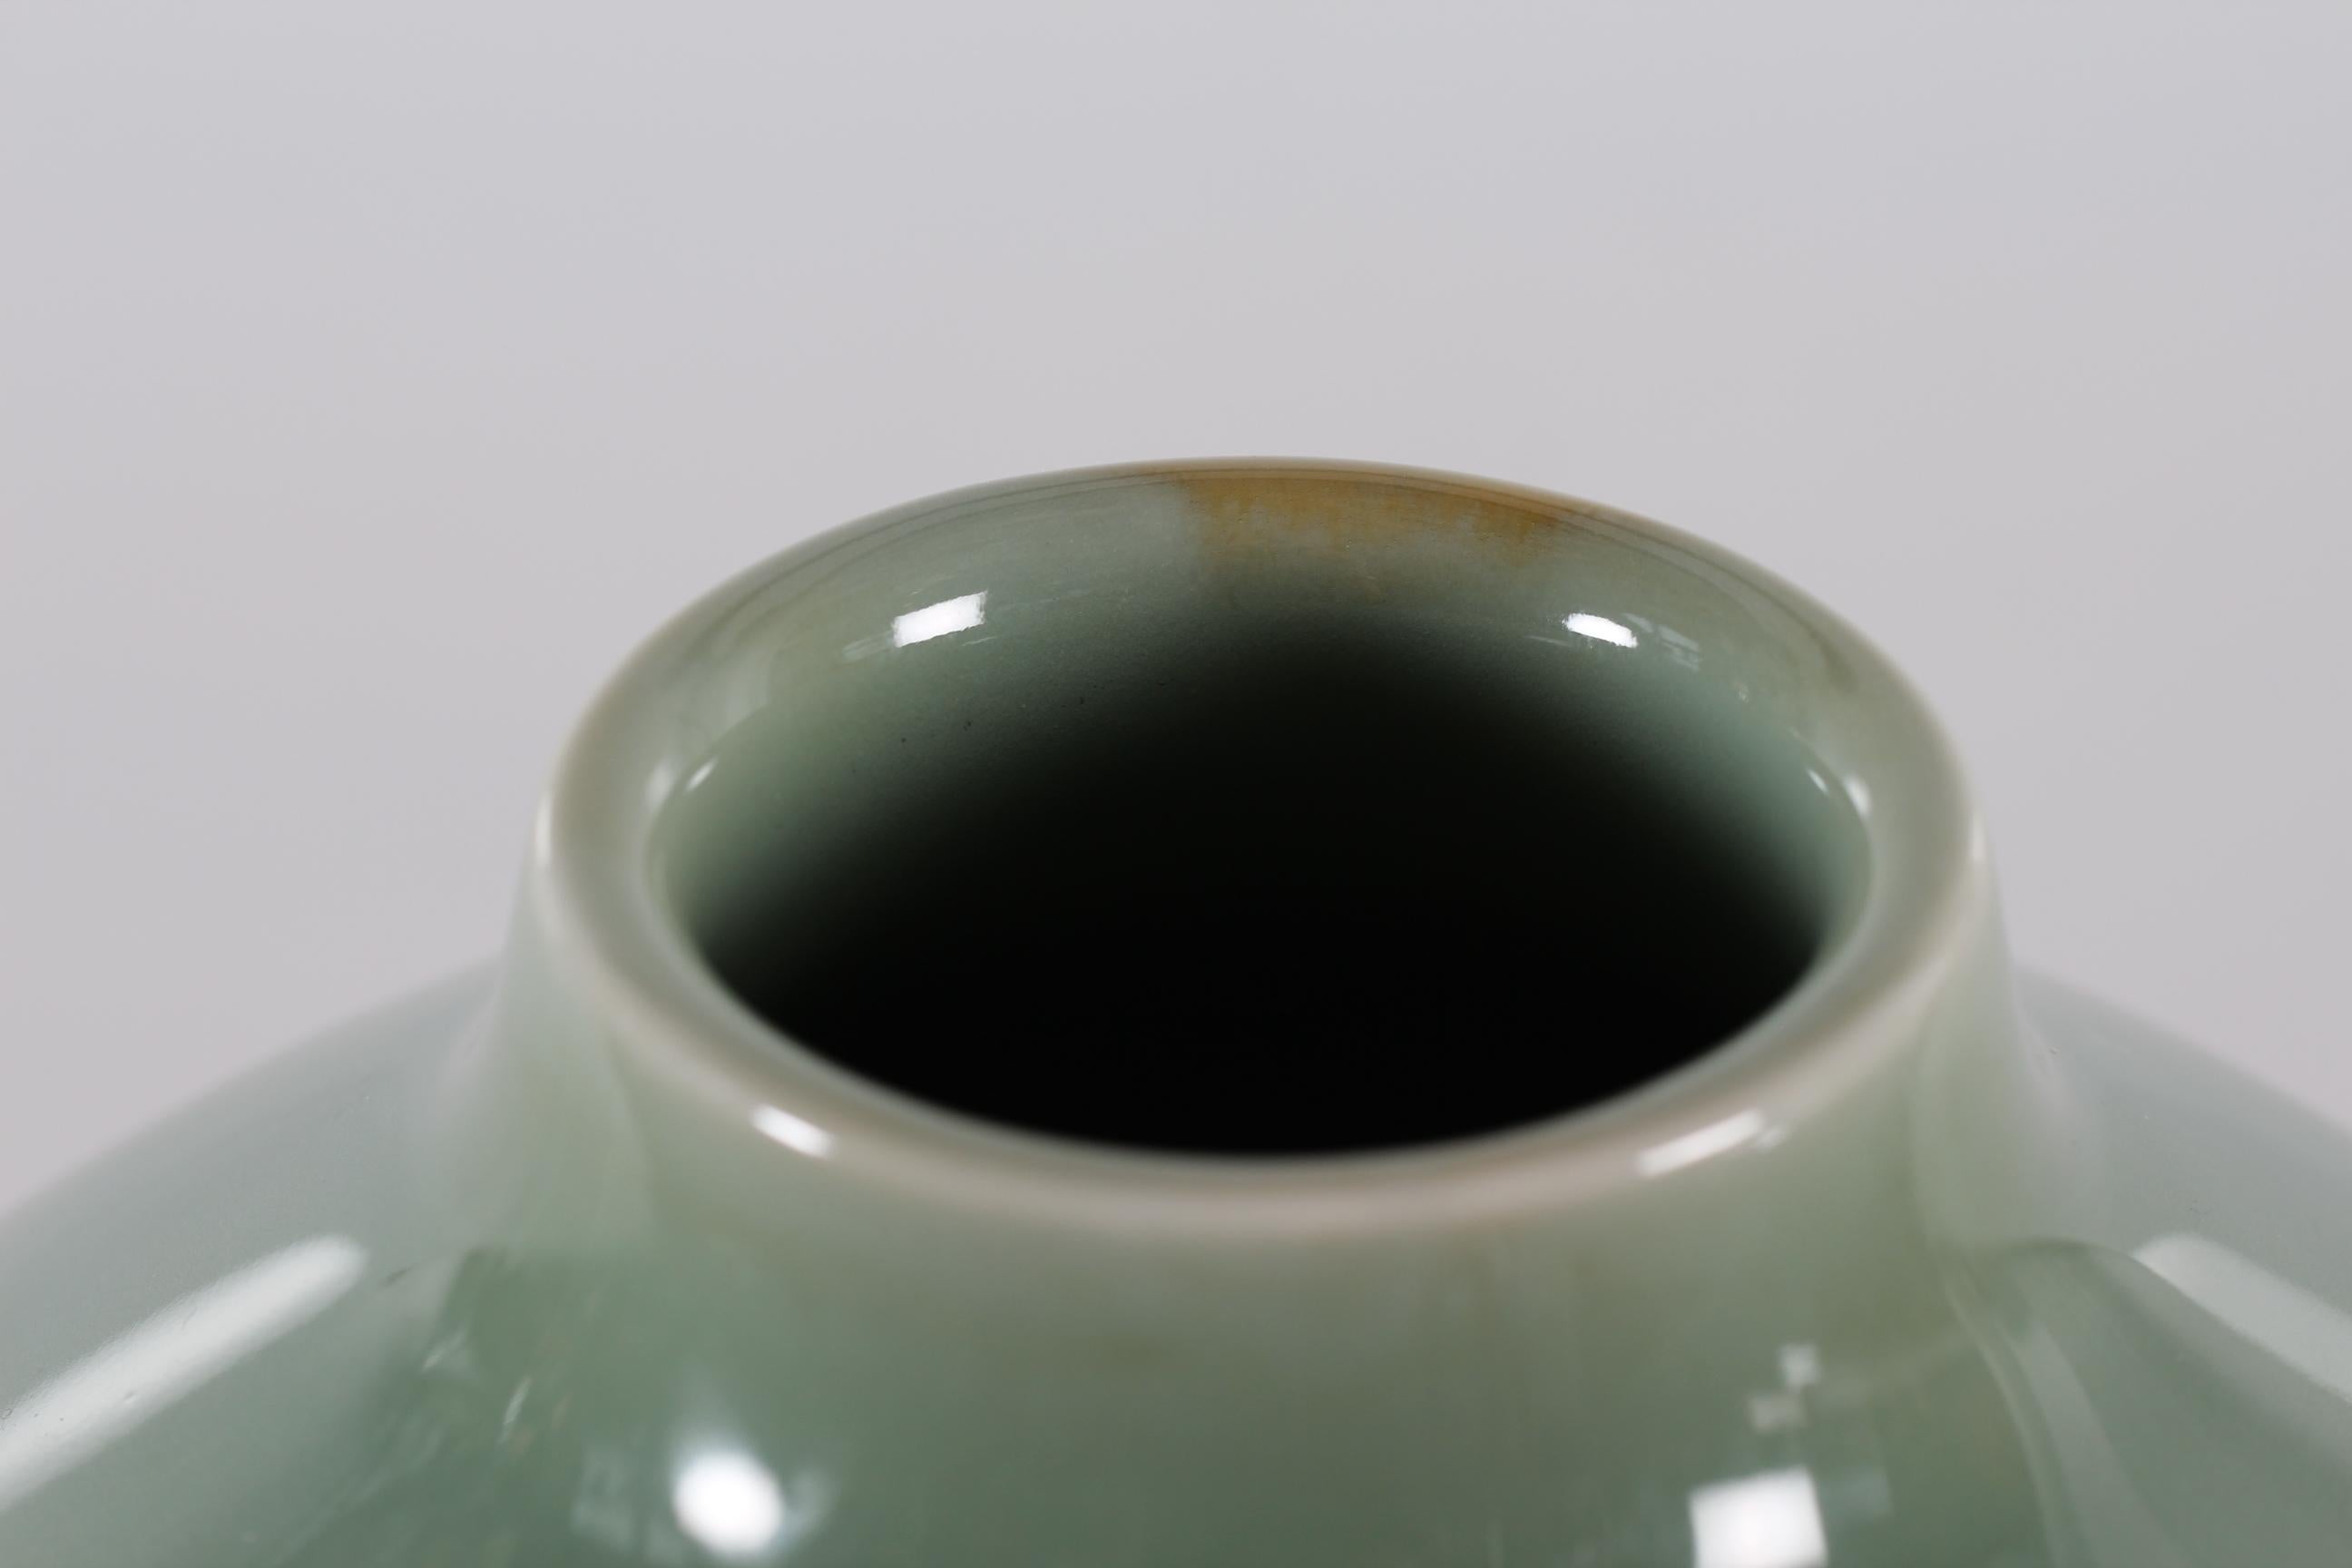 Unique large fine art vase by Nils Thorsson manufactured by Royal Copenhagen in Denmark in the 1950s
It features a stylized decor of eelgrass with glossy celadon glaze is dusty green.

Marked on bottom with 3 waves for Royal Copenhagen and the